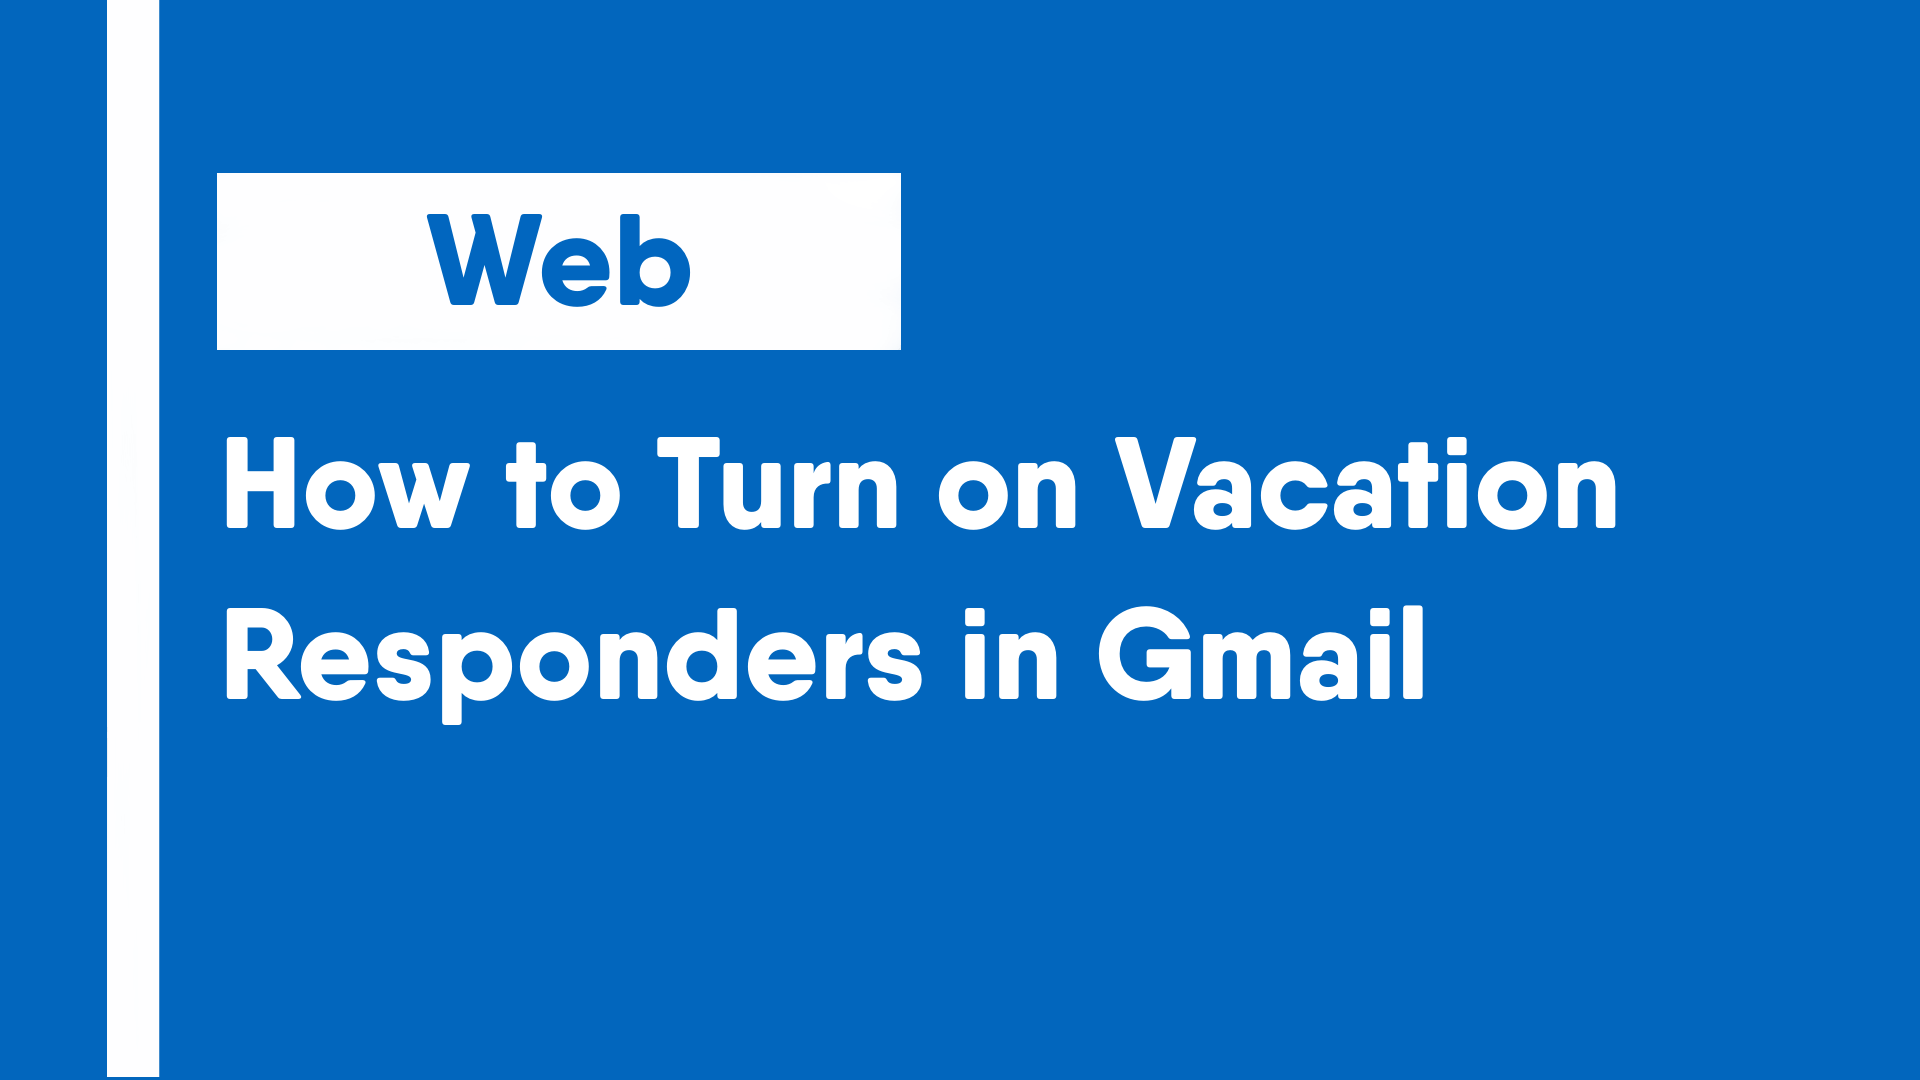 How to Turn on Vacation Responders in Gmail